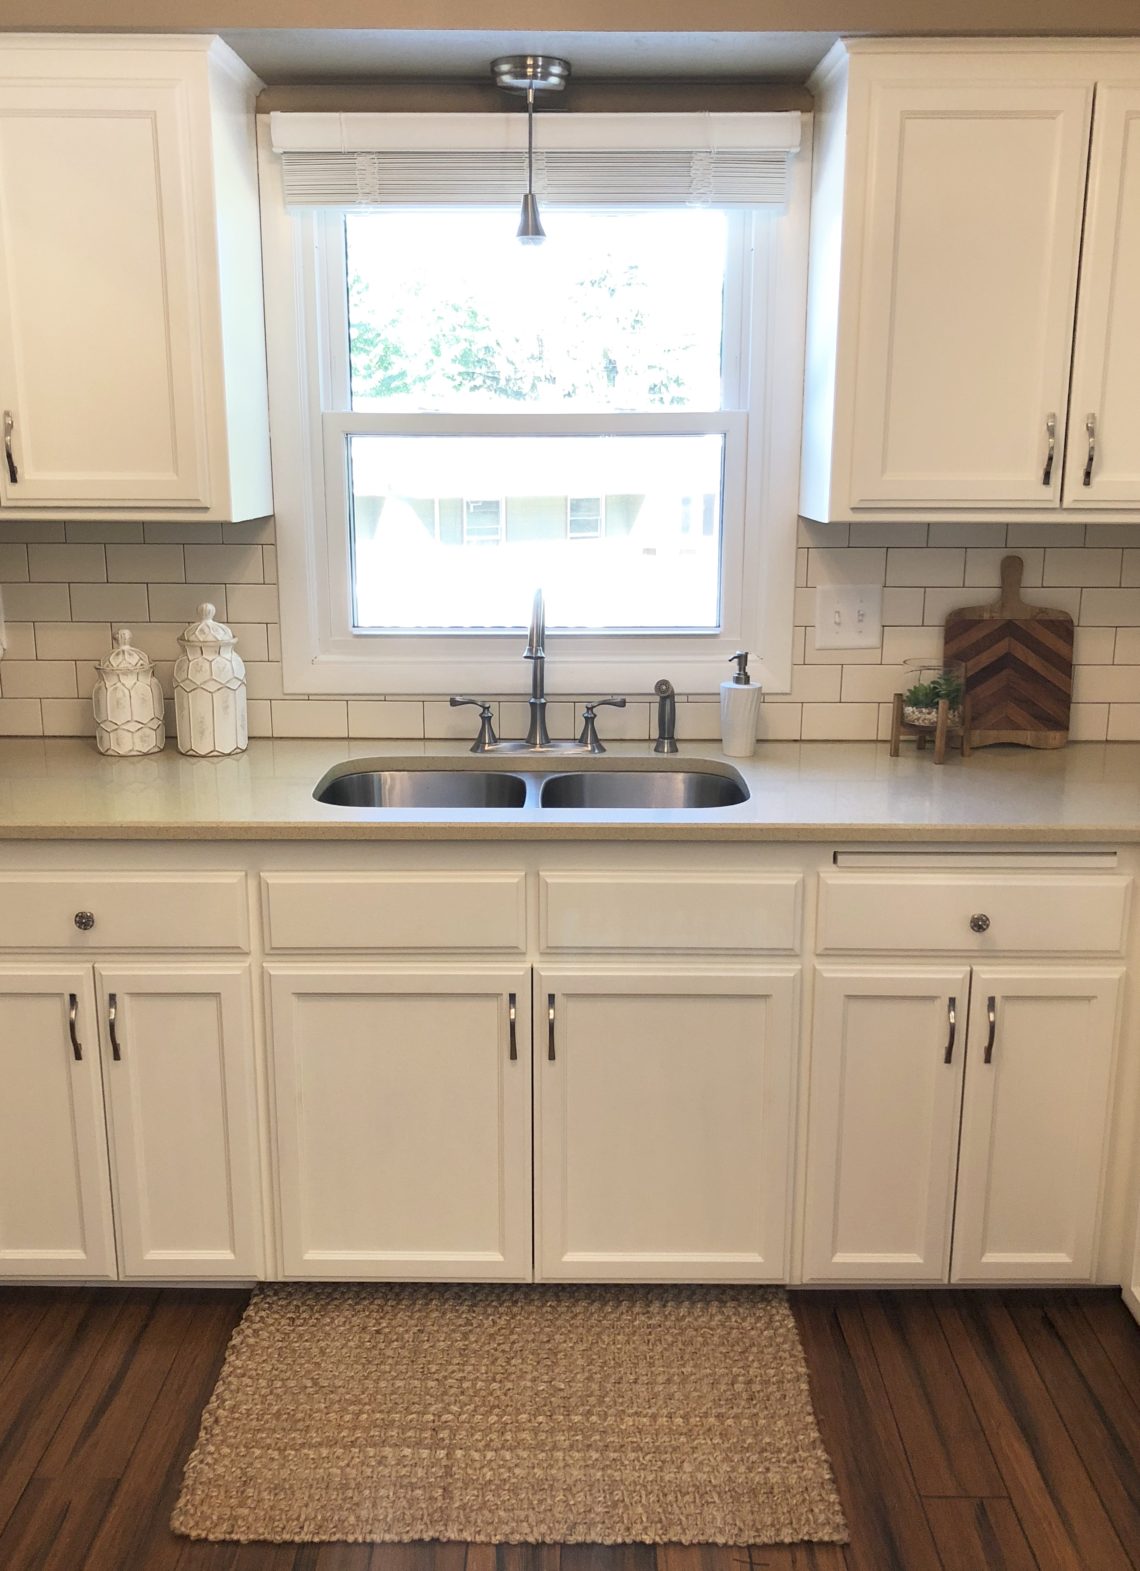 DIY Kitchen Renovation Painting Cabinets, Before and After